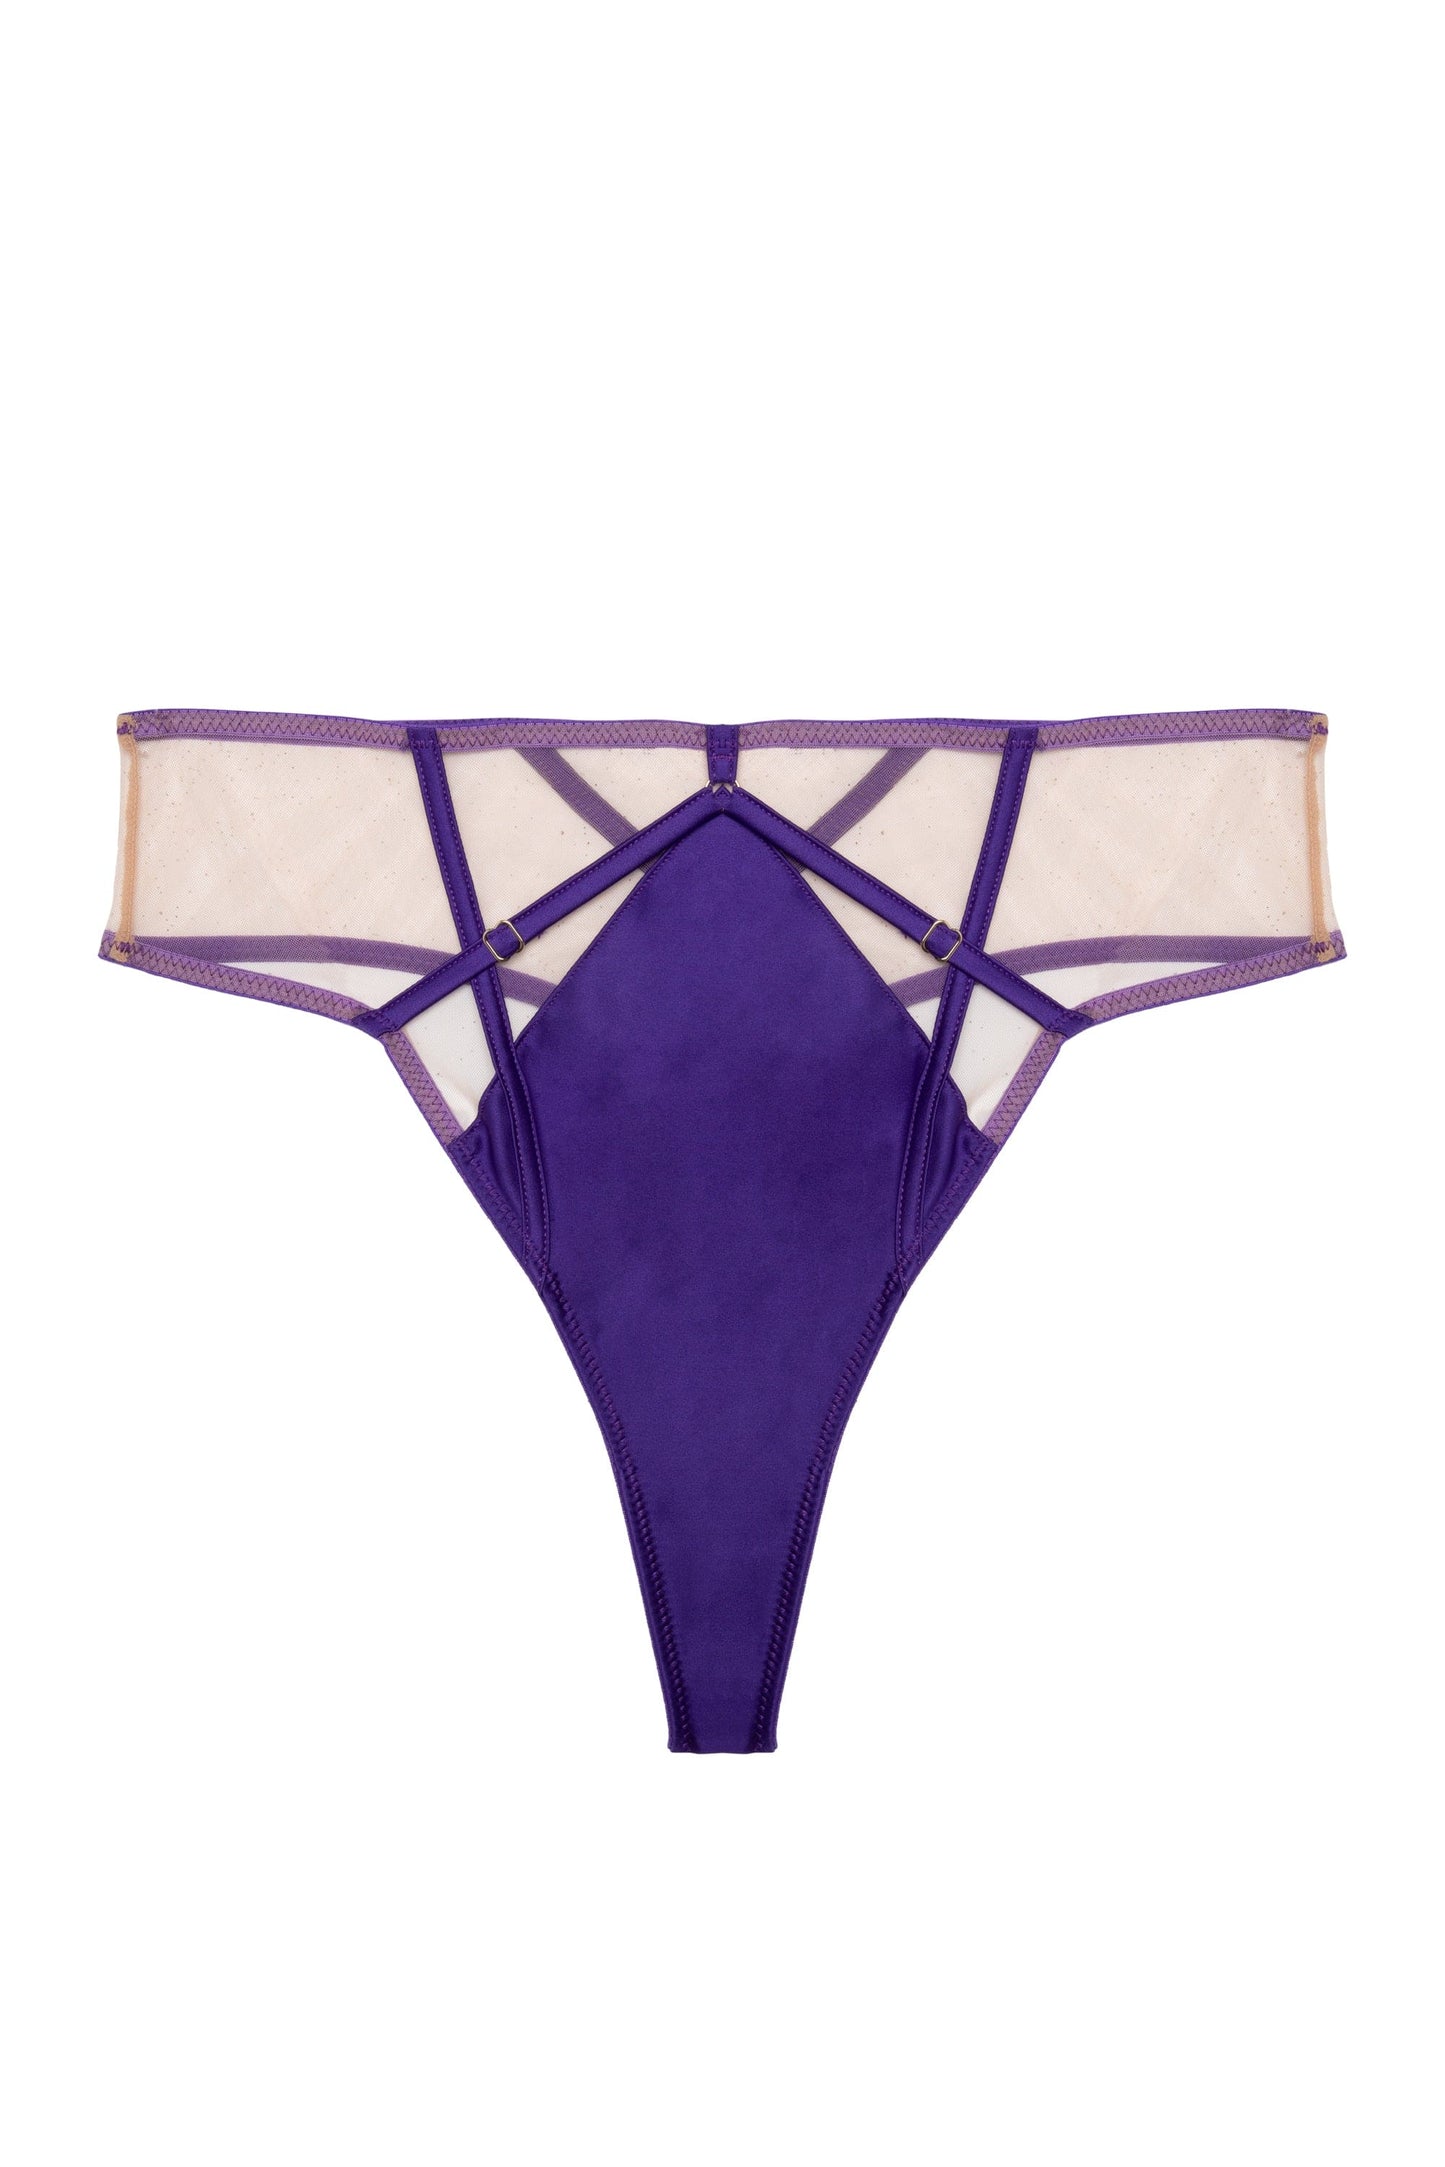 Ramona in Purple Strappy Illusion High Waist Thong By Playful Promises - sizes 4-22